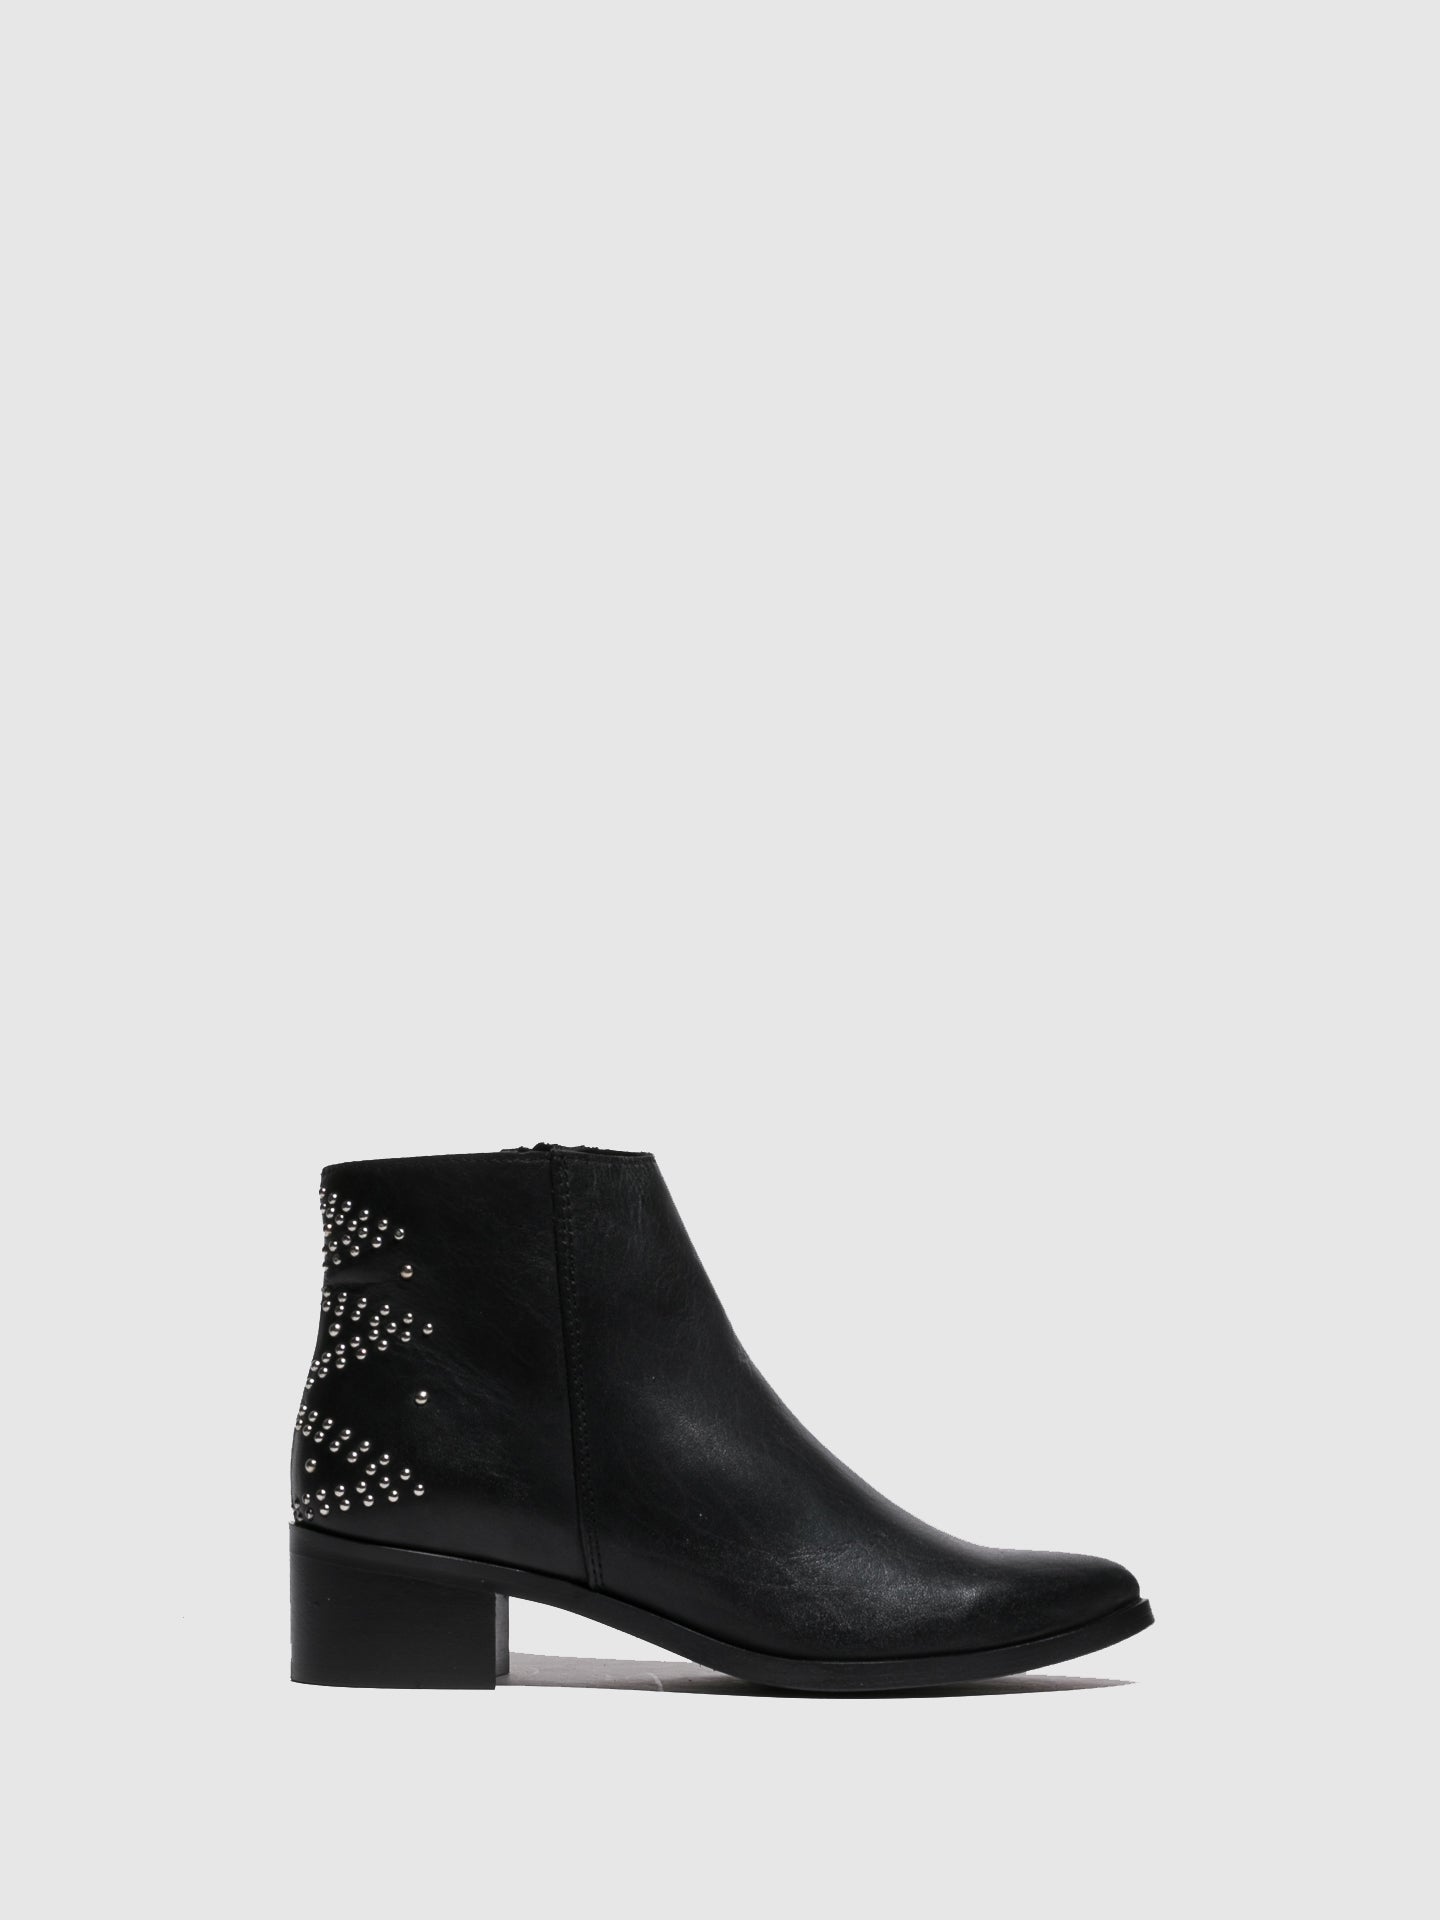 Foreva Black Pointed Toe Ankle Boots